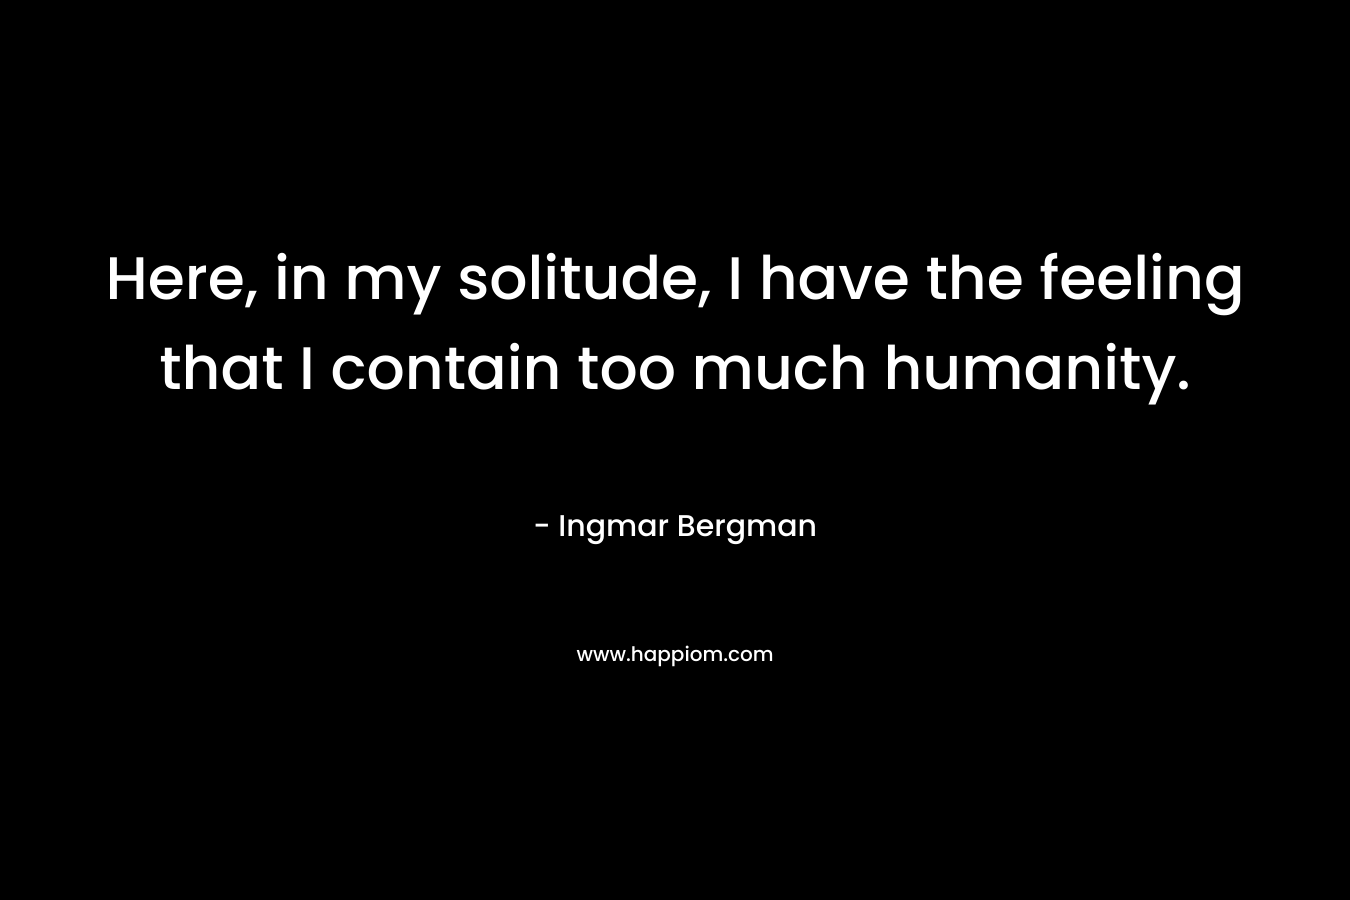 Here, in my solitude, I have the feeling that I contain too much humanity.